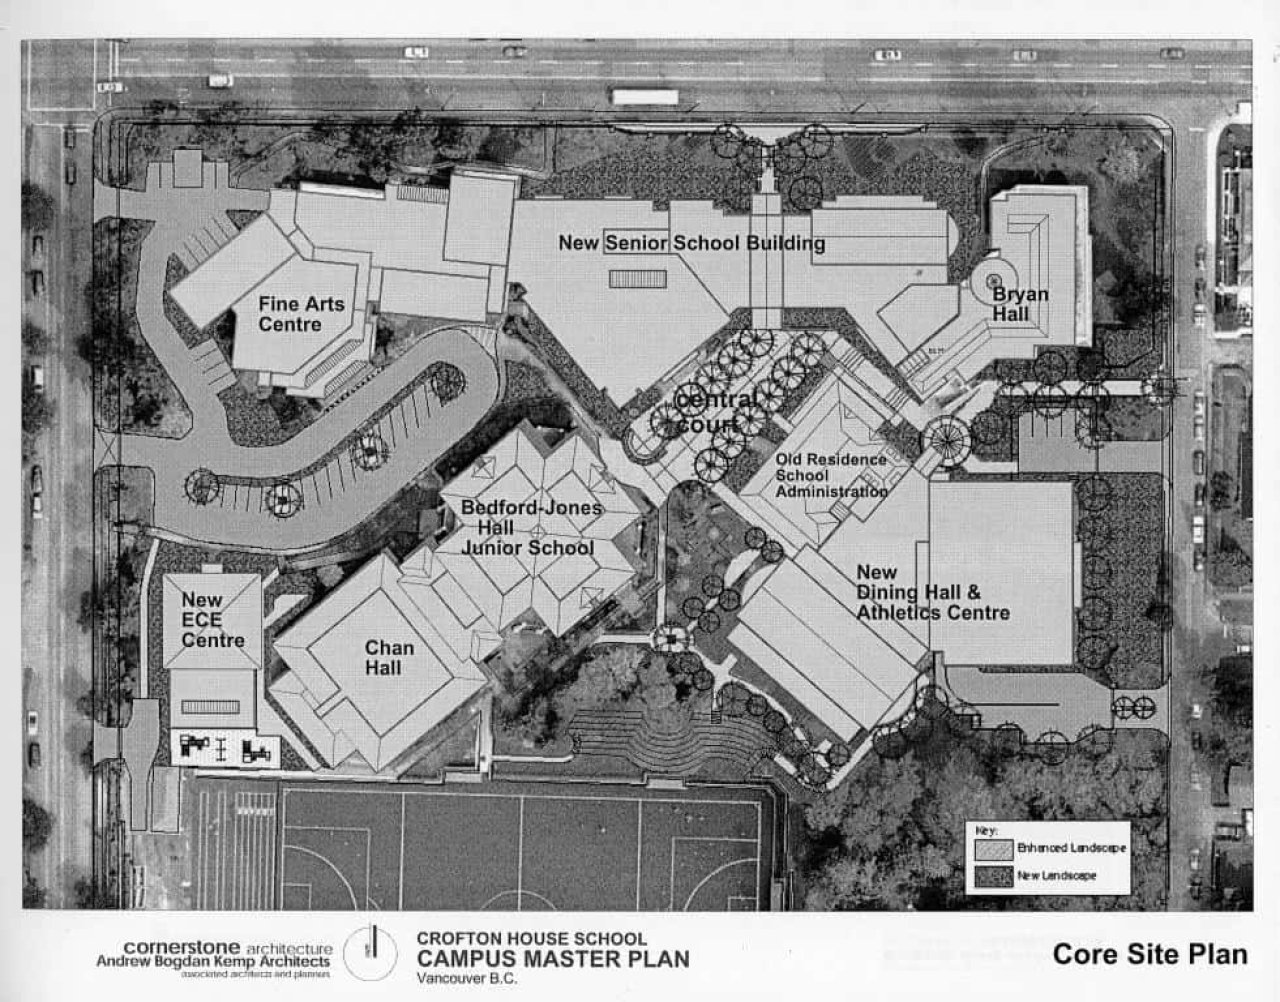 Crofton House School Campus Master Plan from 2004.